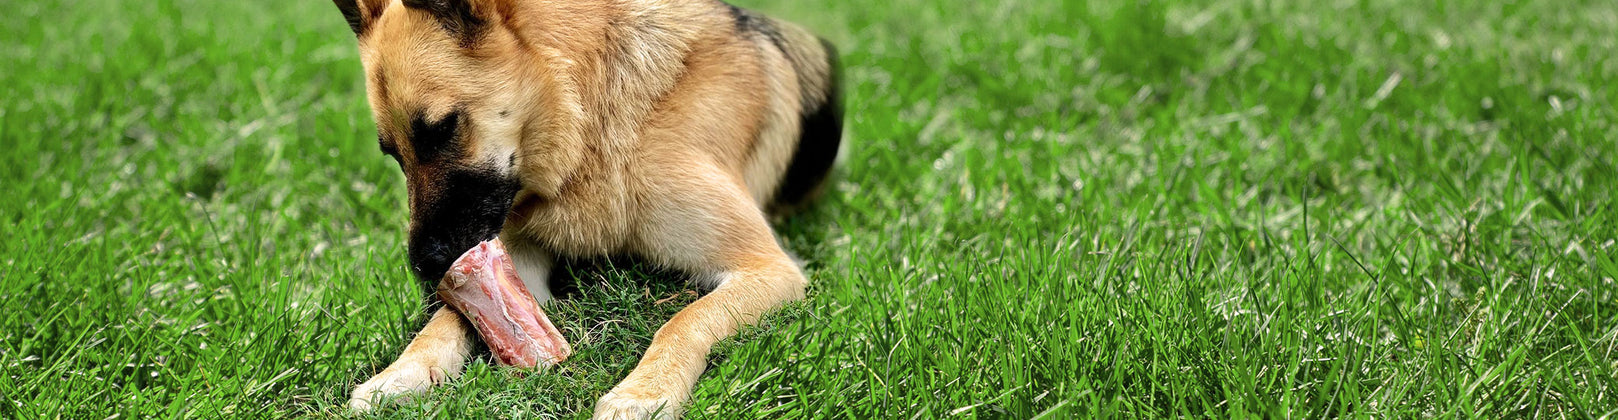 Dog Bone Cheatsheet: The Serious Differences Between the Types of Dog Bones